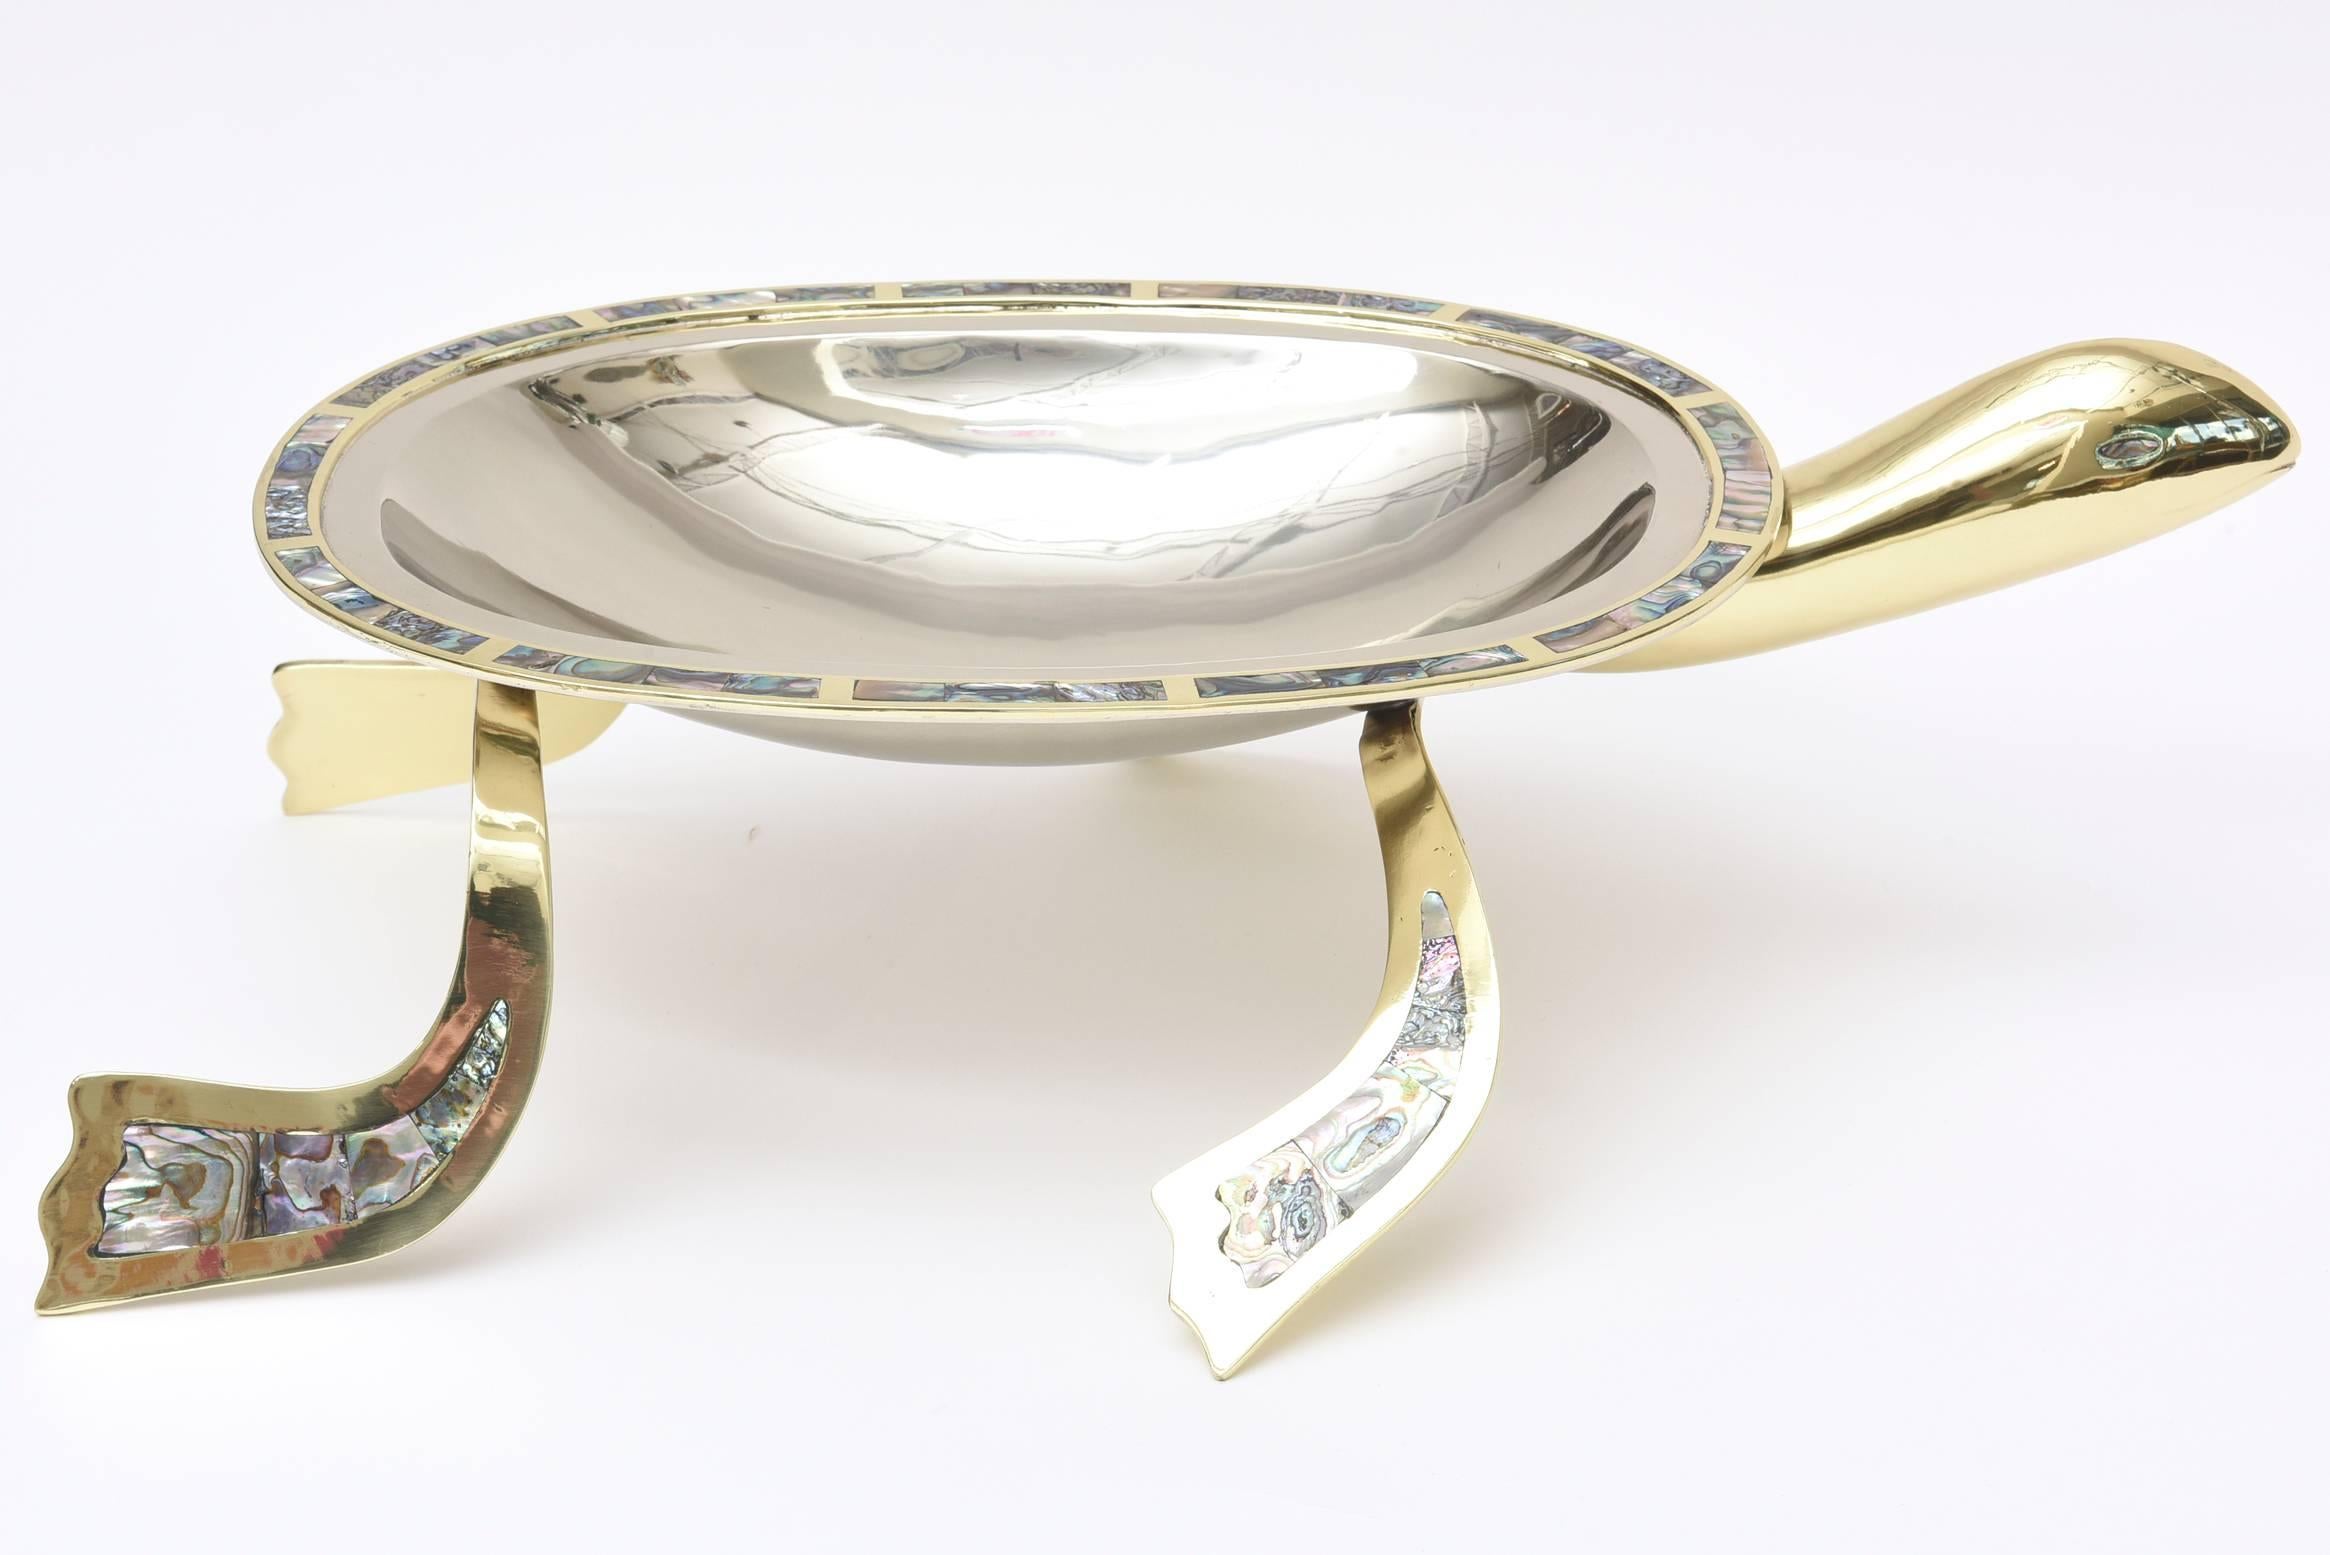 The combination of abalone, brass and silver plate make this dramatic and fun monumental turtle serving piece or centerpiece bowl a great conversation piece. It has all been professionally polished. The abalone eyes and legs and perimeter make this